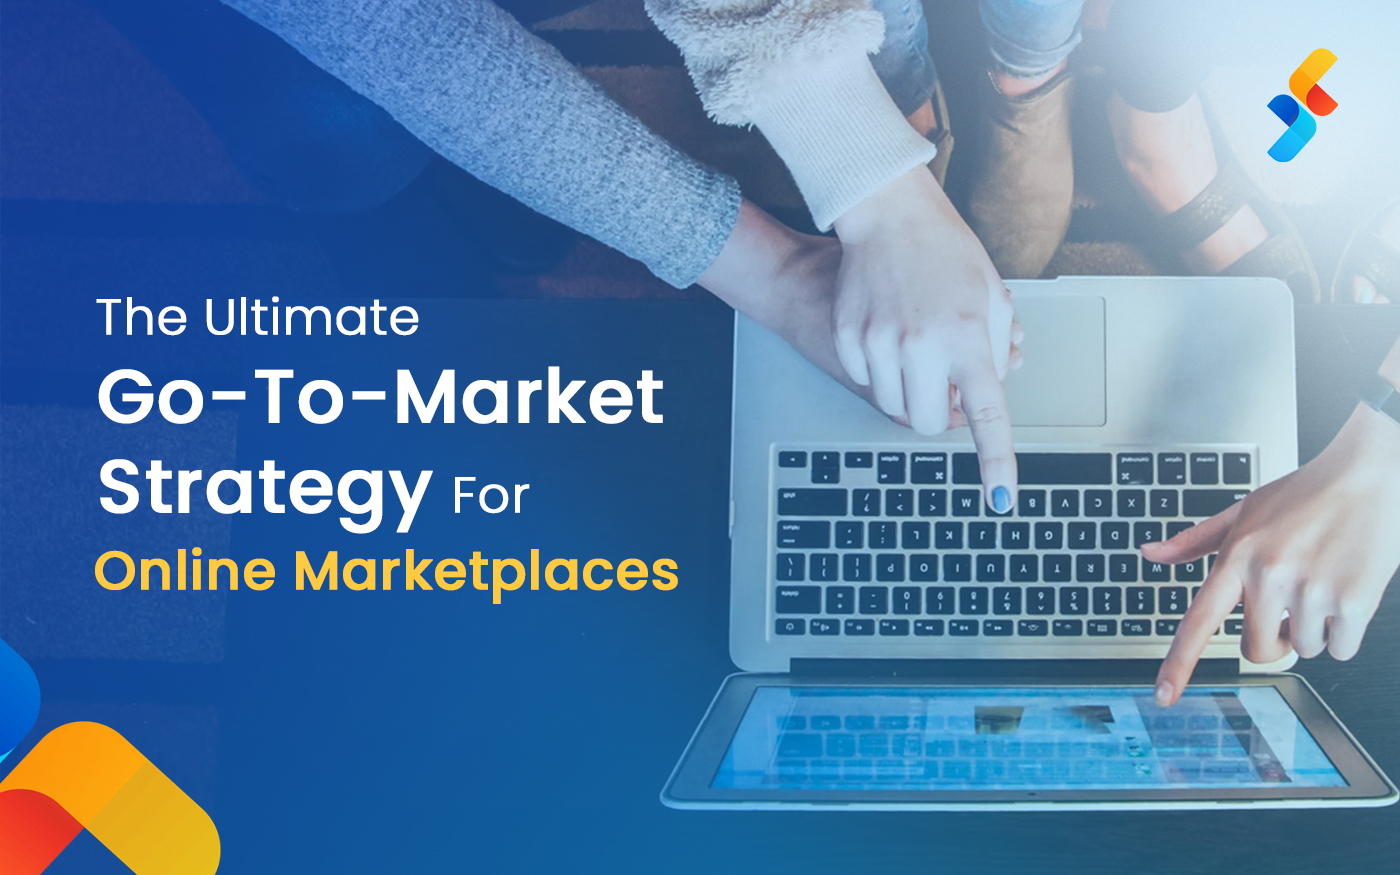 The Ultimate Go-To-Market Strategy for Your Online Marketplace